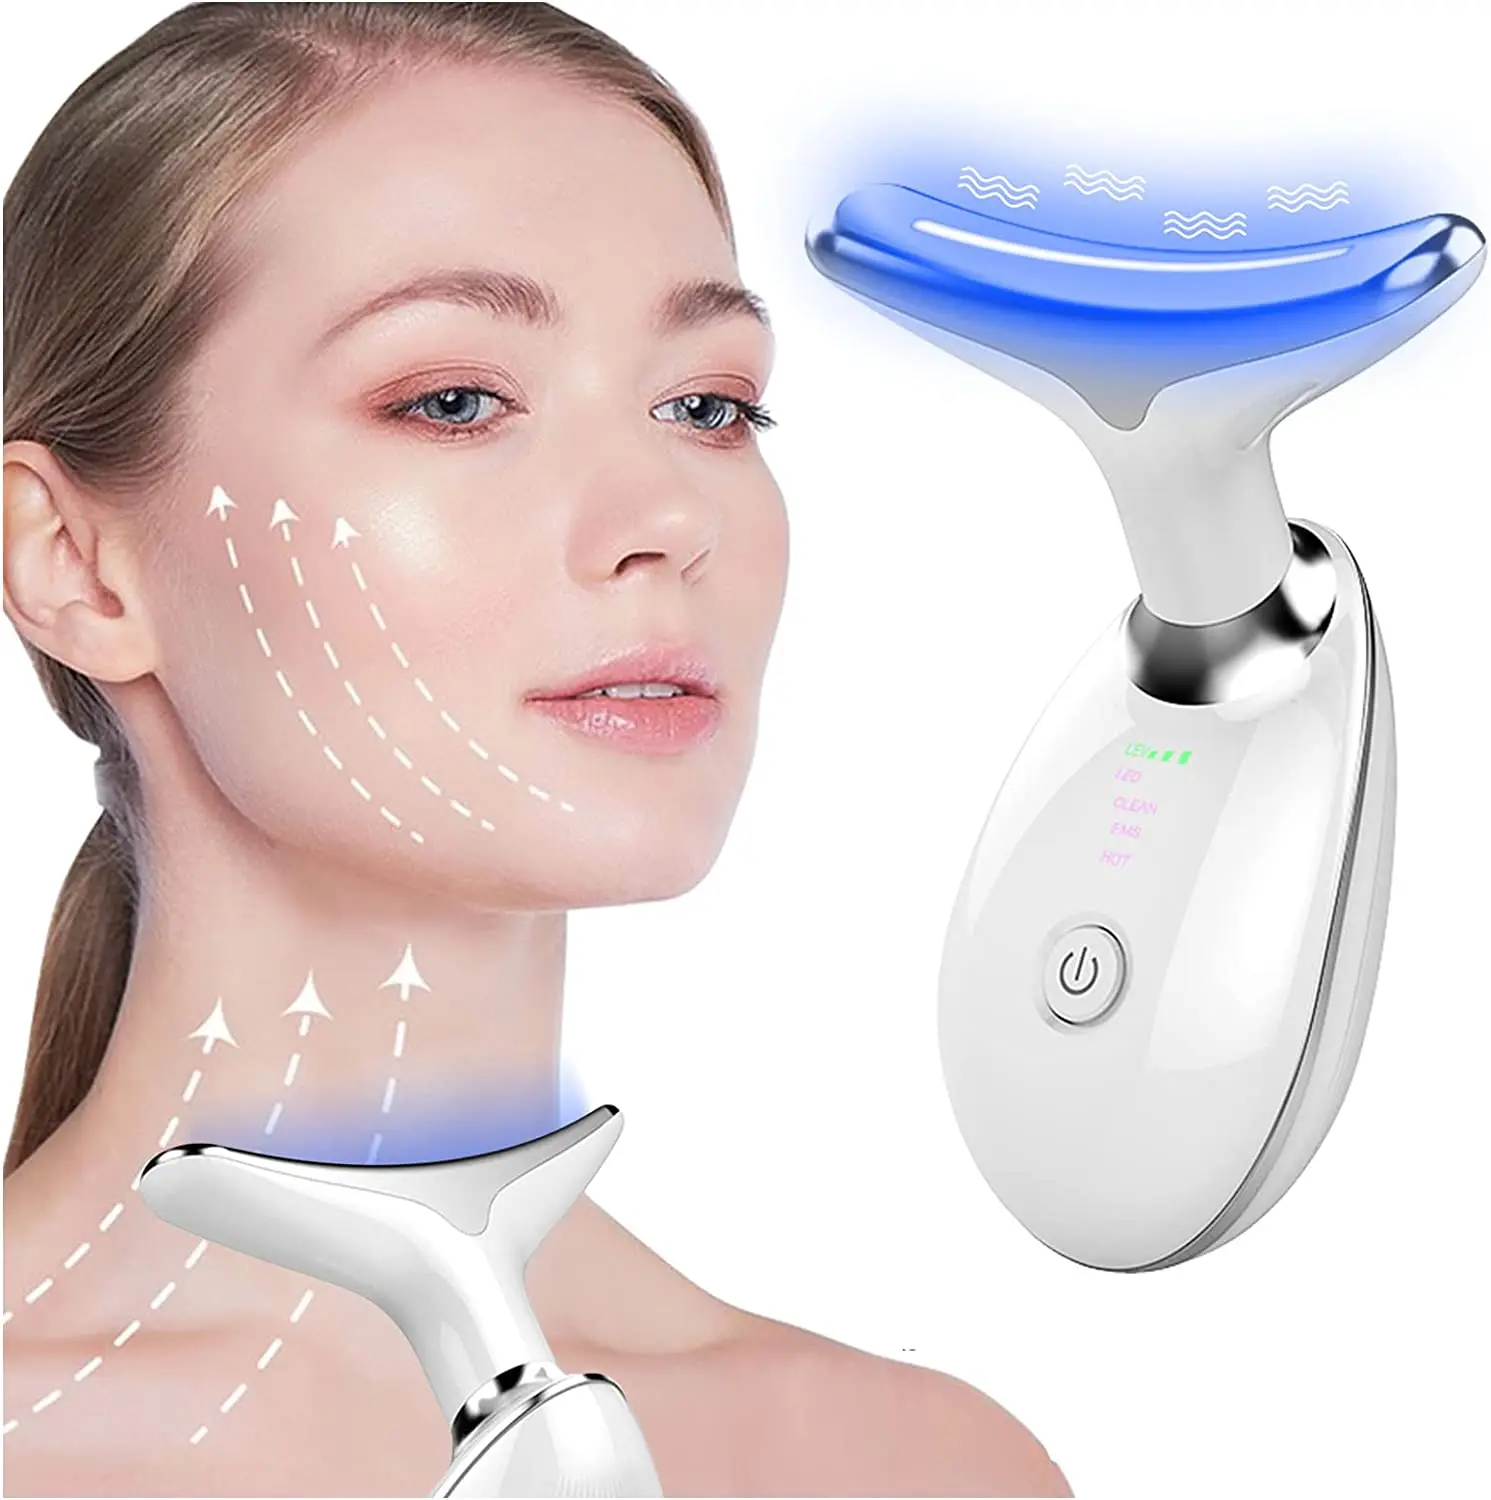 Firming Wrinkle Removal Tool Face And Neck Face Skin Tool  Face Neck Beauty Tool Massager Wrinkles Removal Tightens Sagging Skin